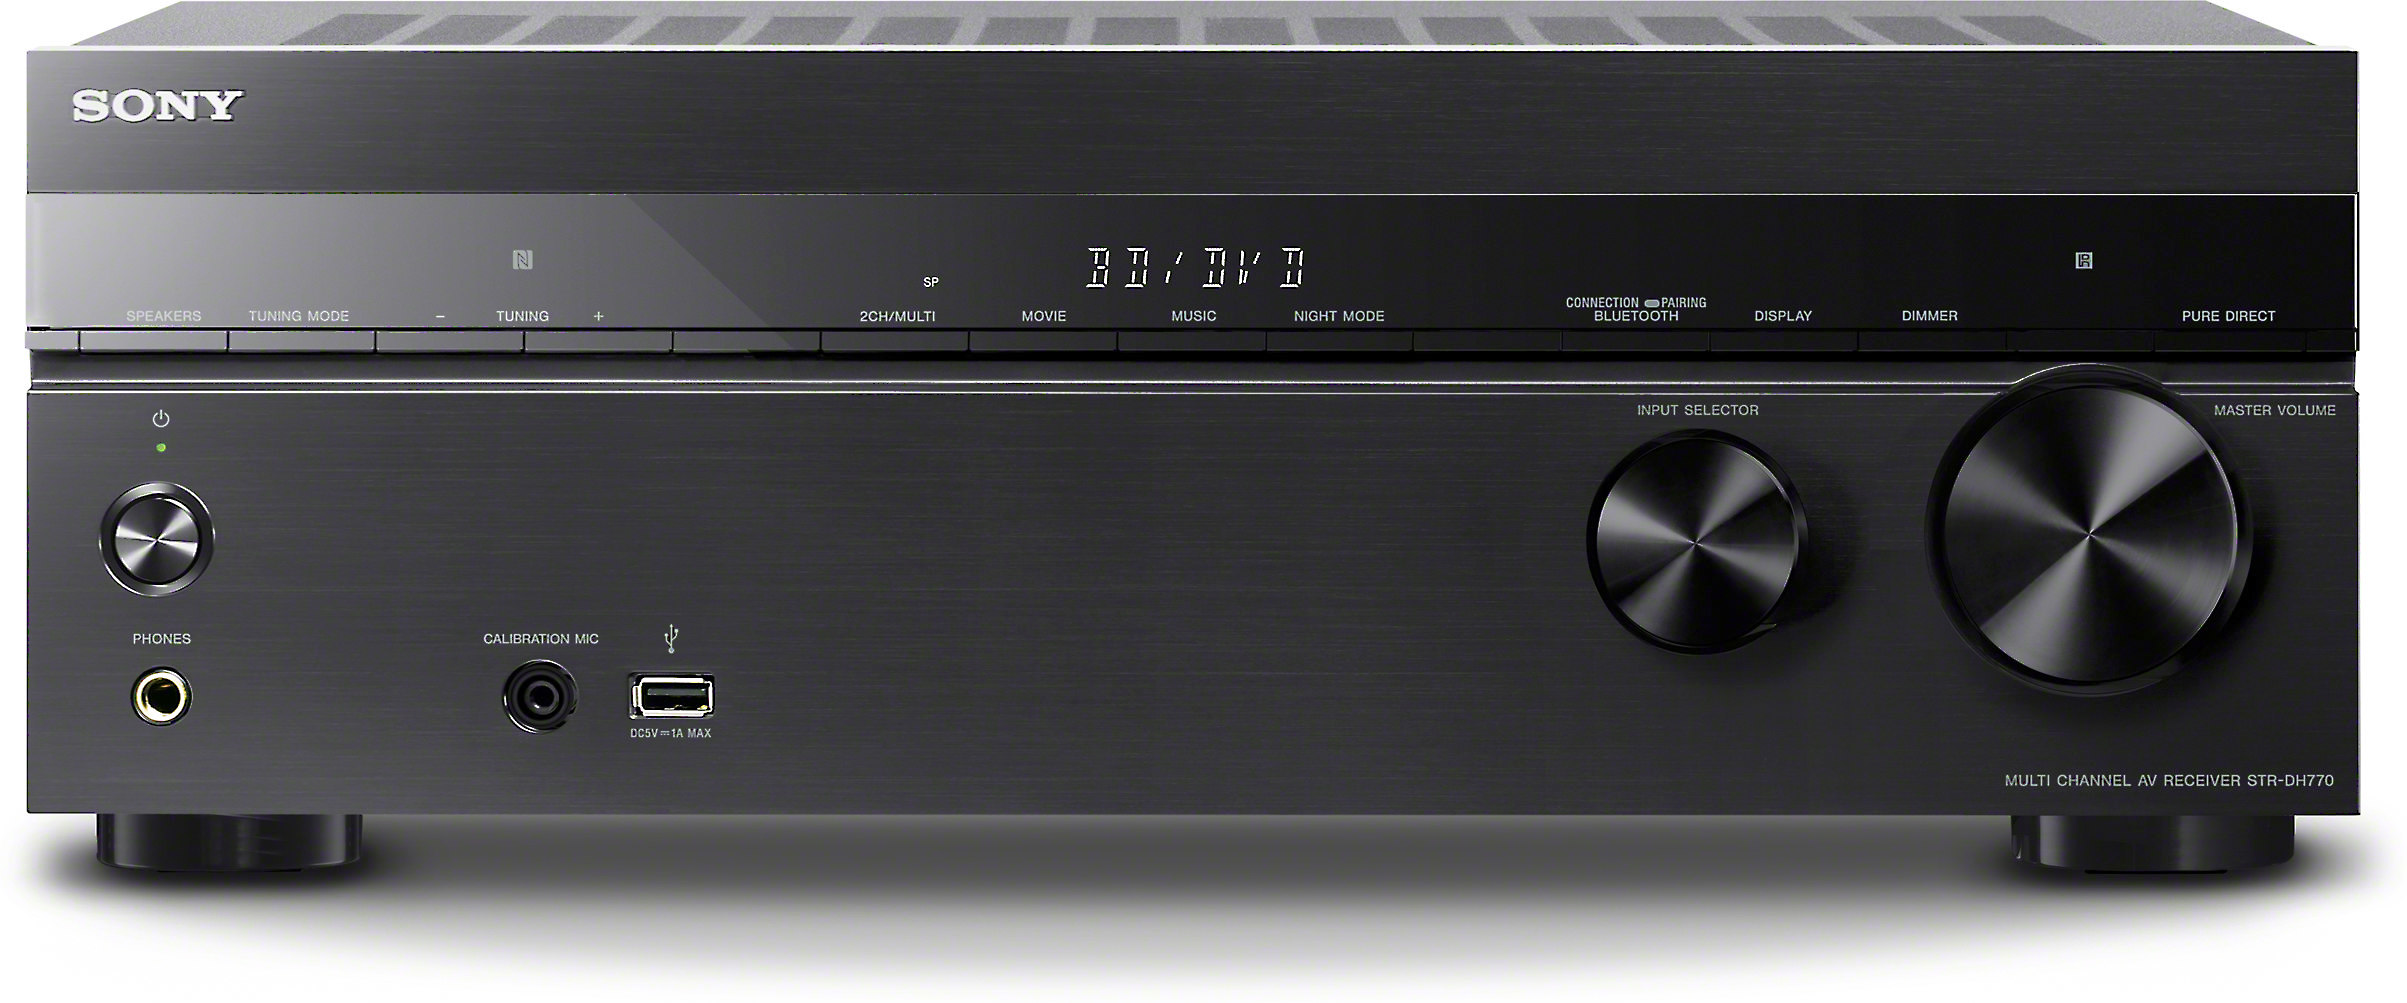 Sony Str Dh770 72 Channel Home Theater Receiver With Bluetooth At Crutchfield